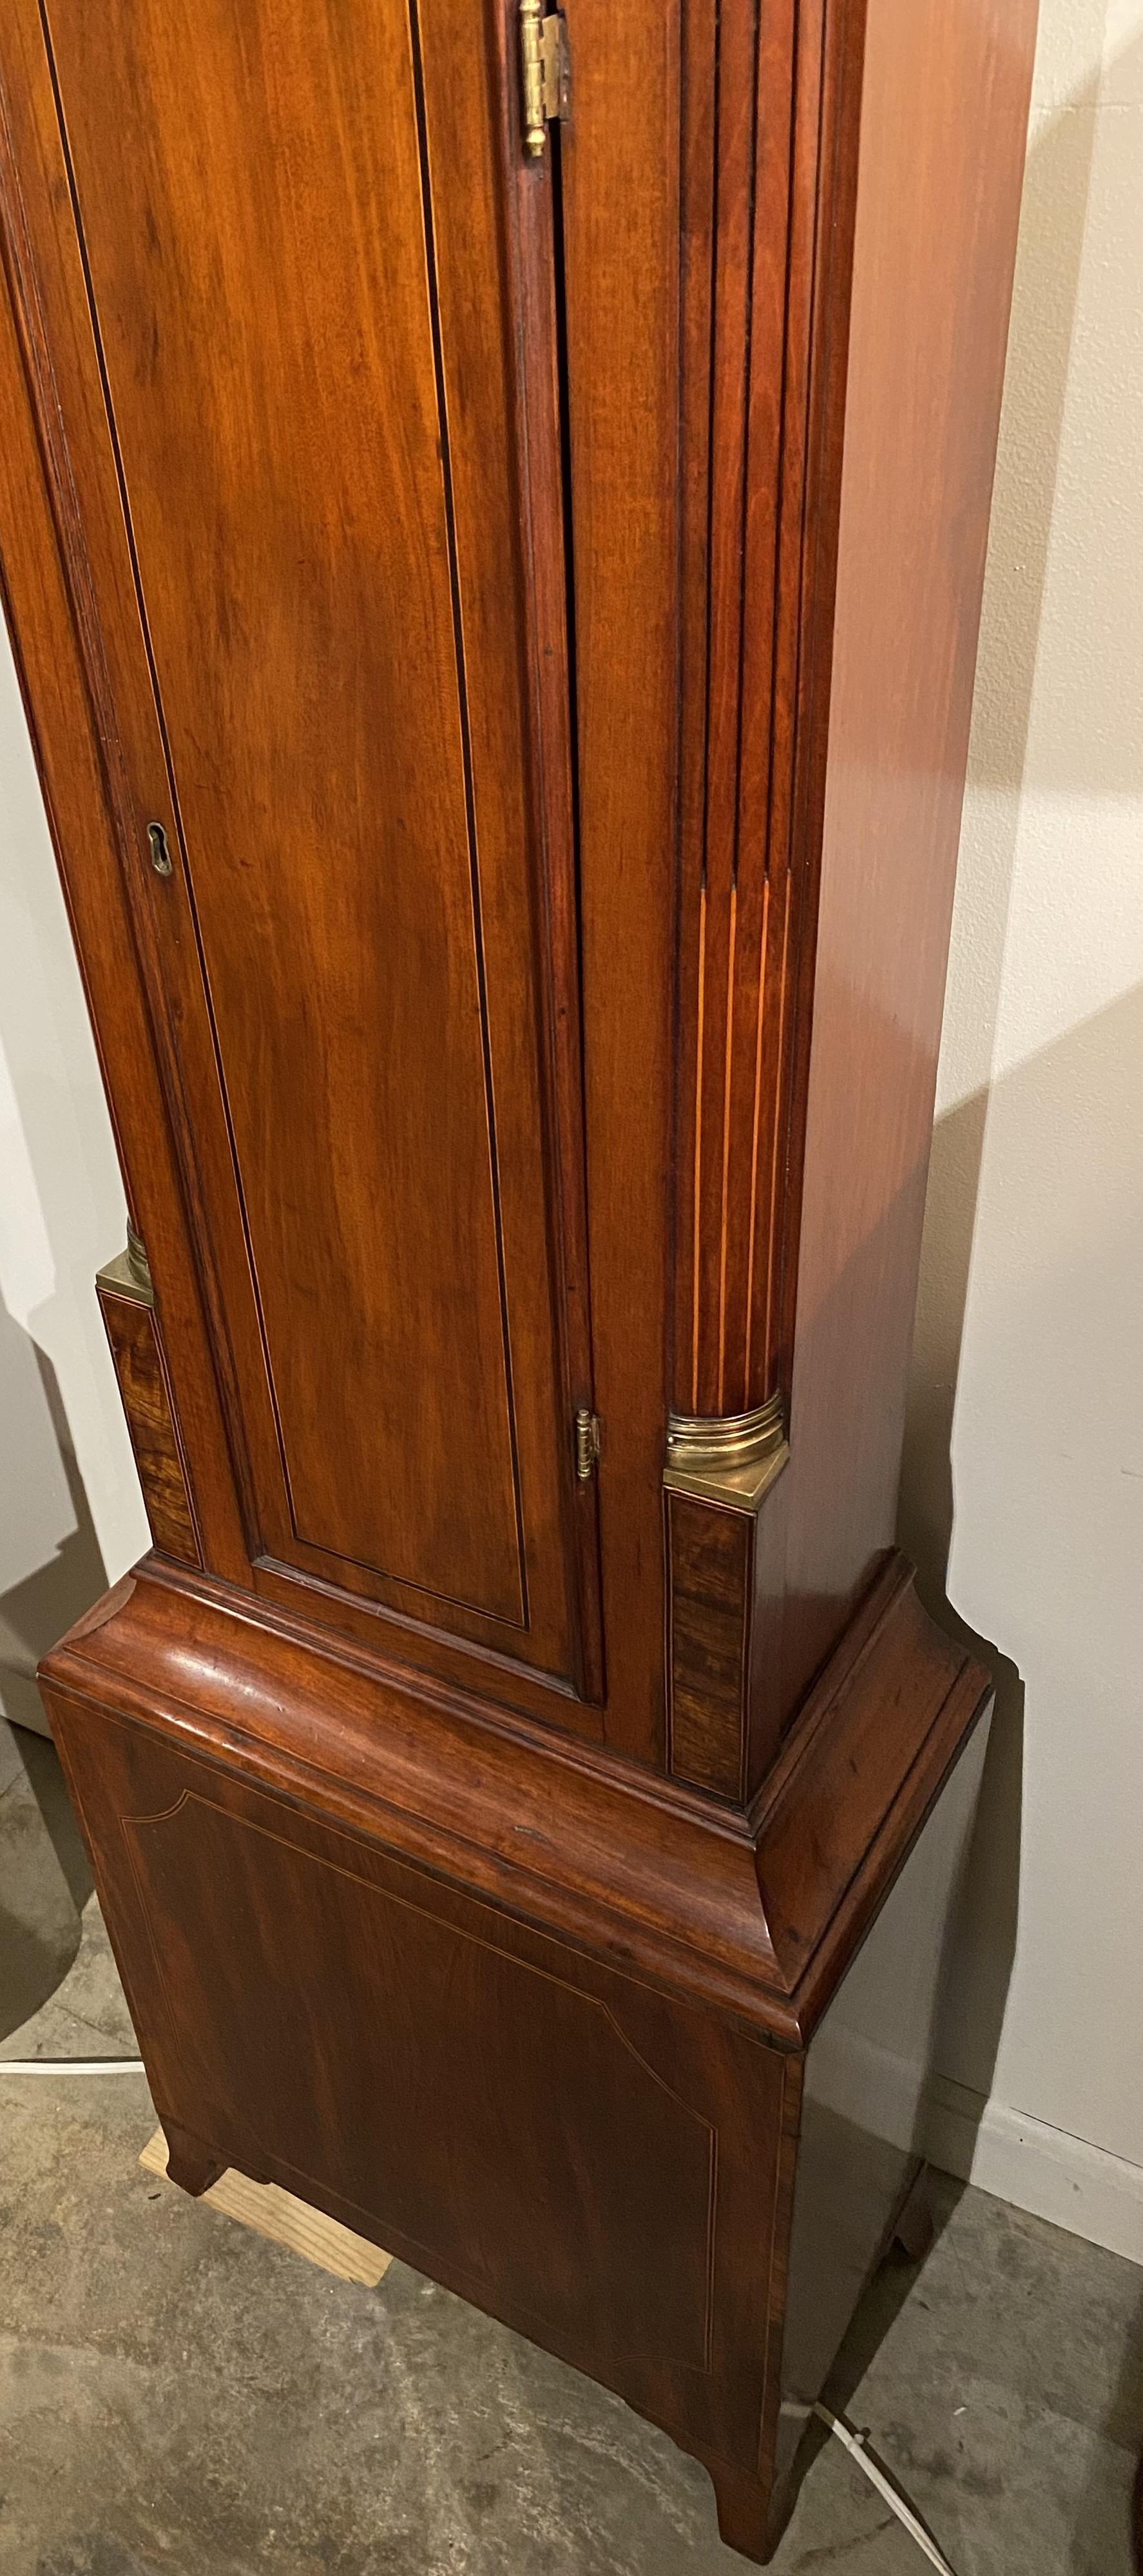 Metal William Cummens Federal Mahogany Tall Clock with Moon Phase Dial circa 1820 For Sale